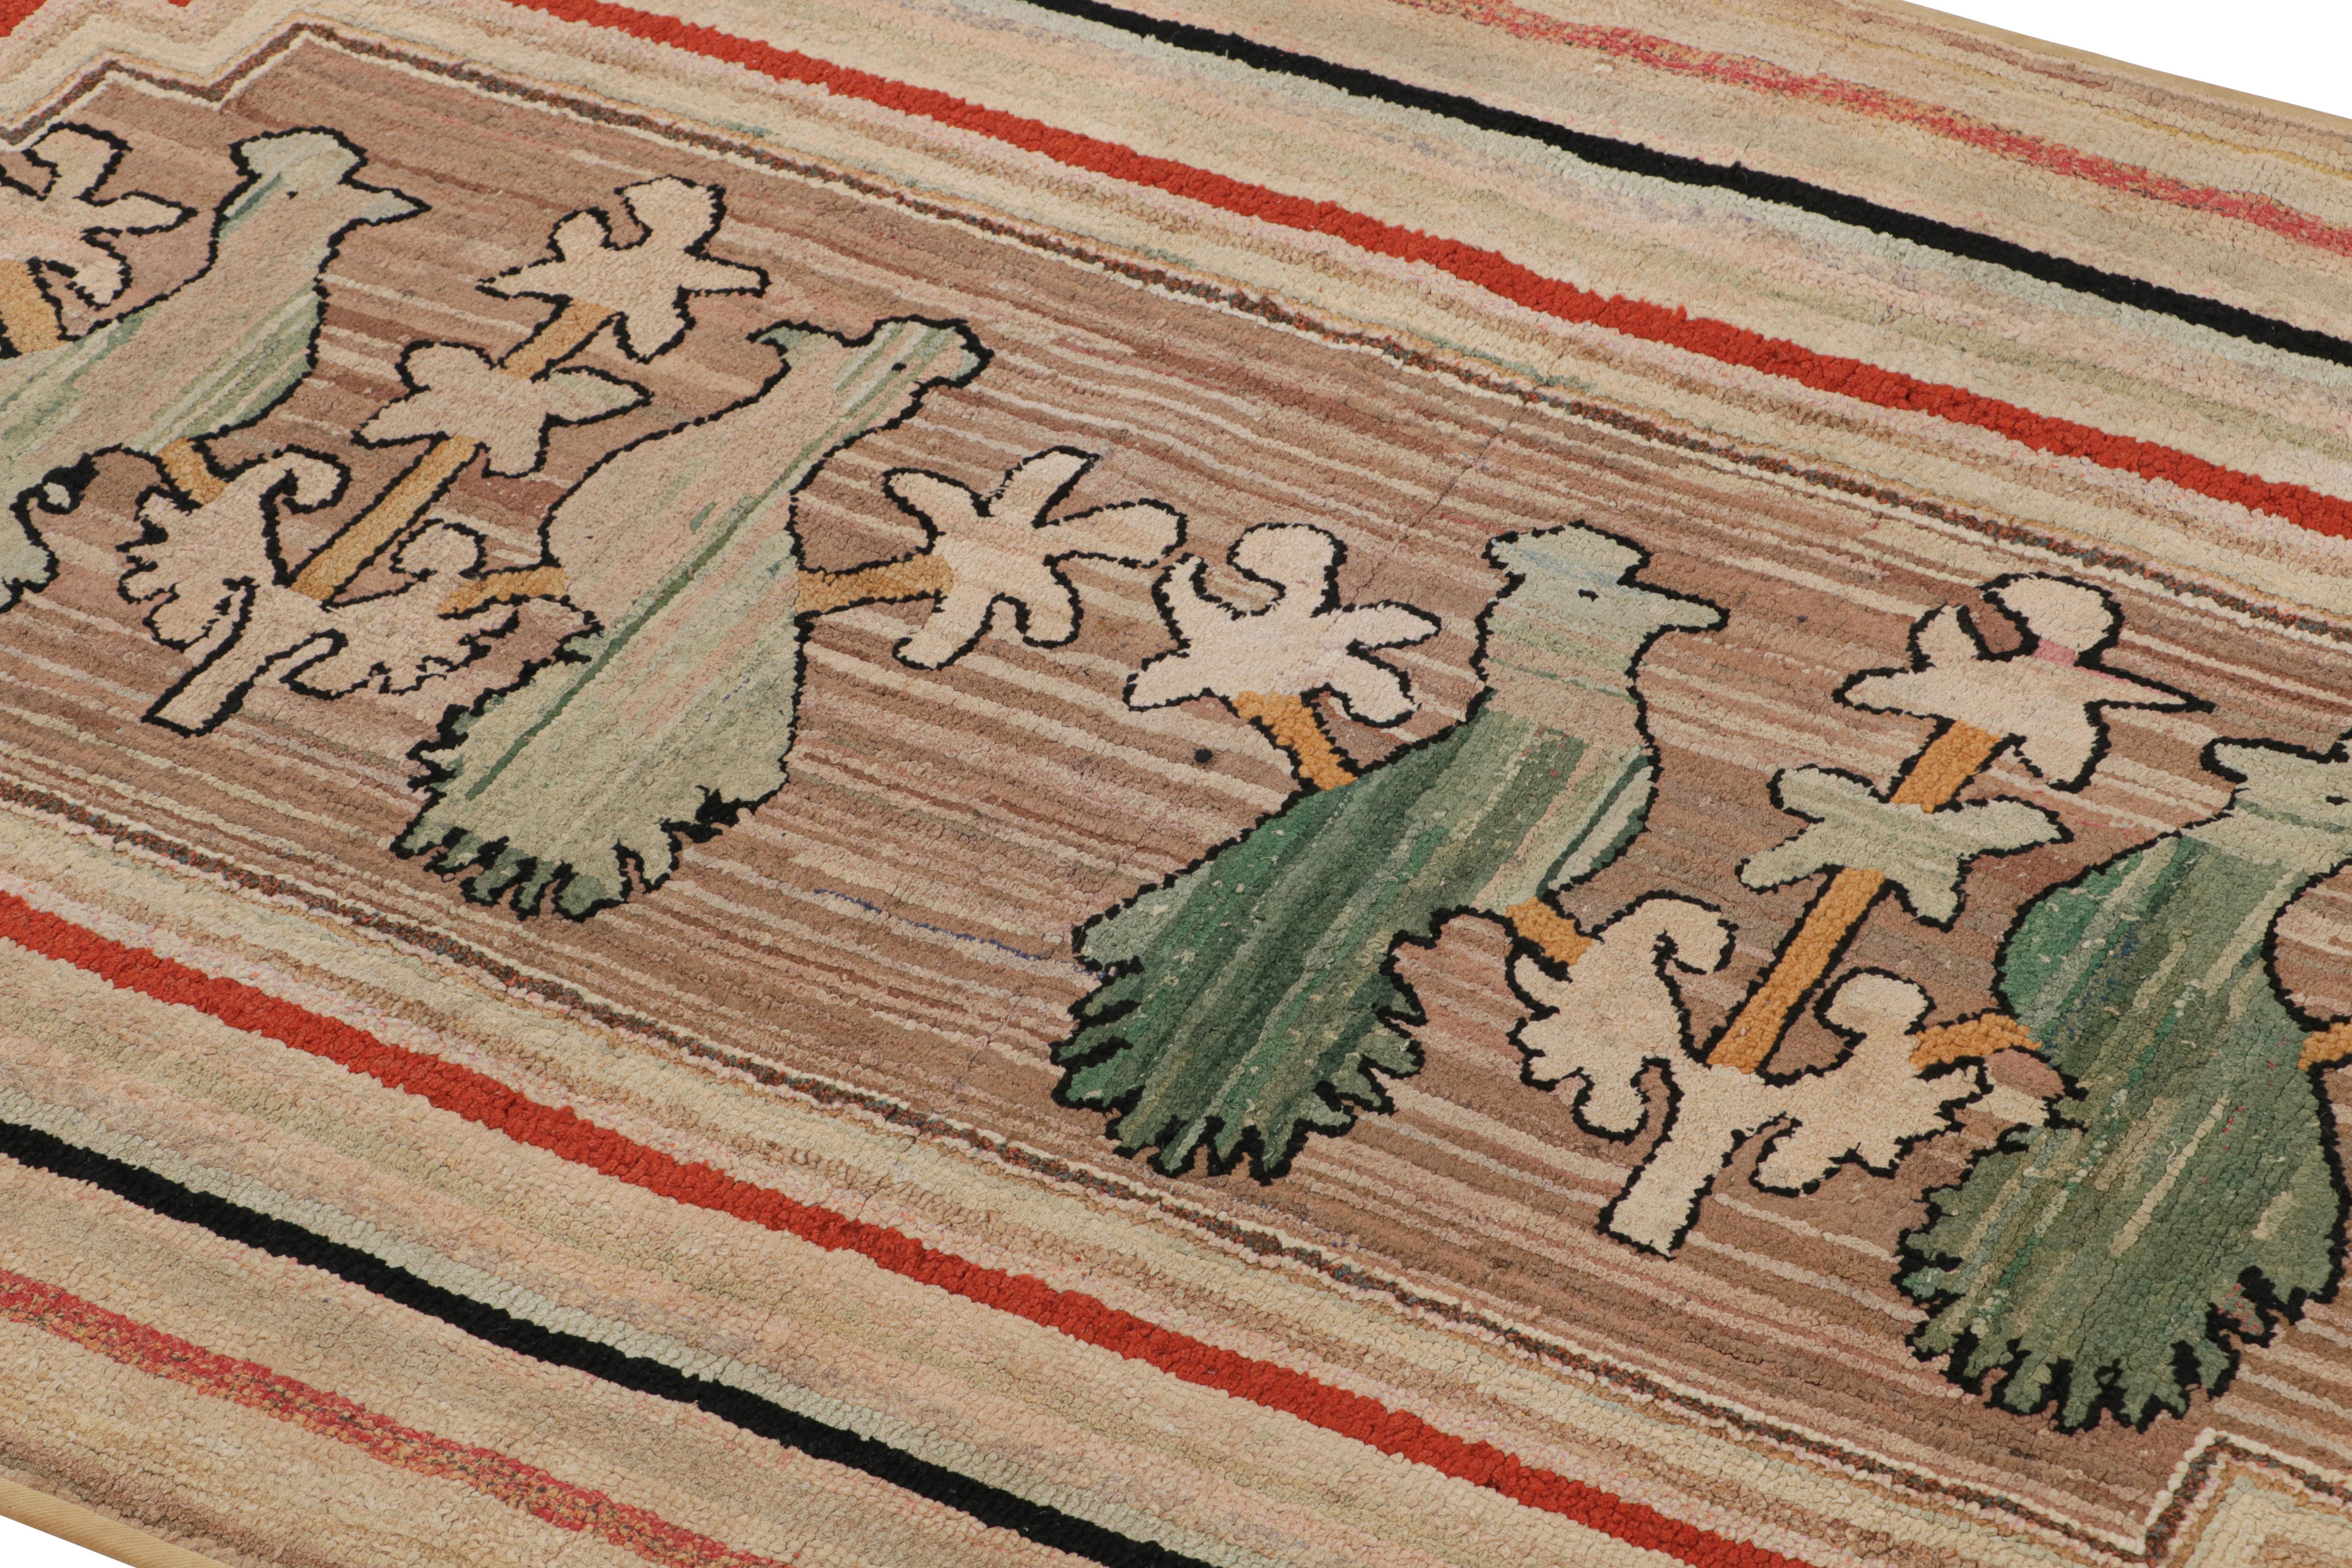 Hand-Knotted Antique Hooked Runner Rug in Beige with Green Bird Pictorials, from Rug & Kilim